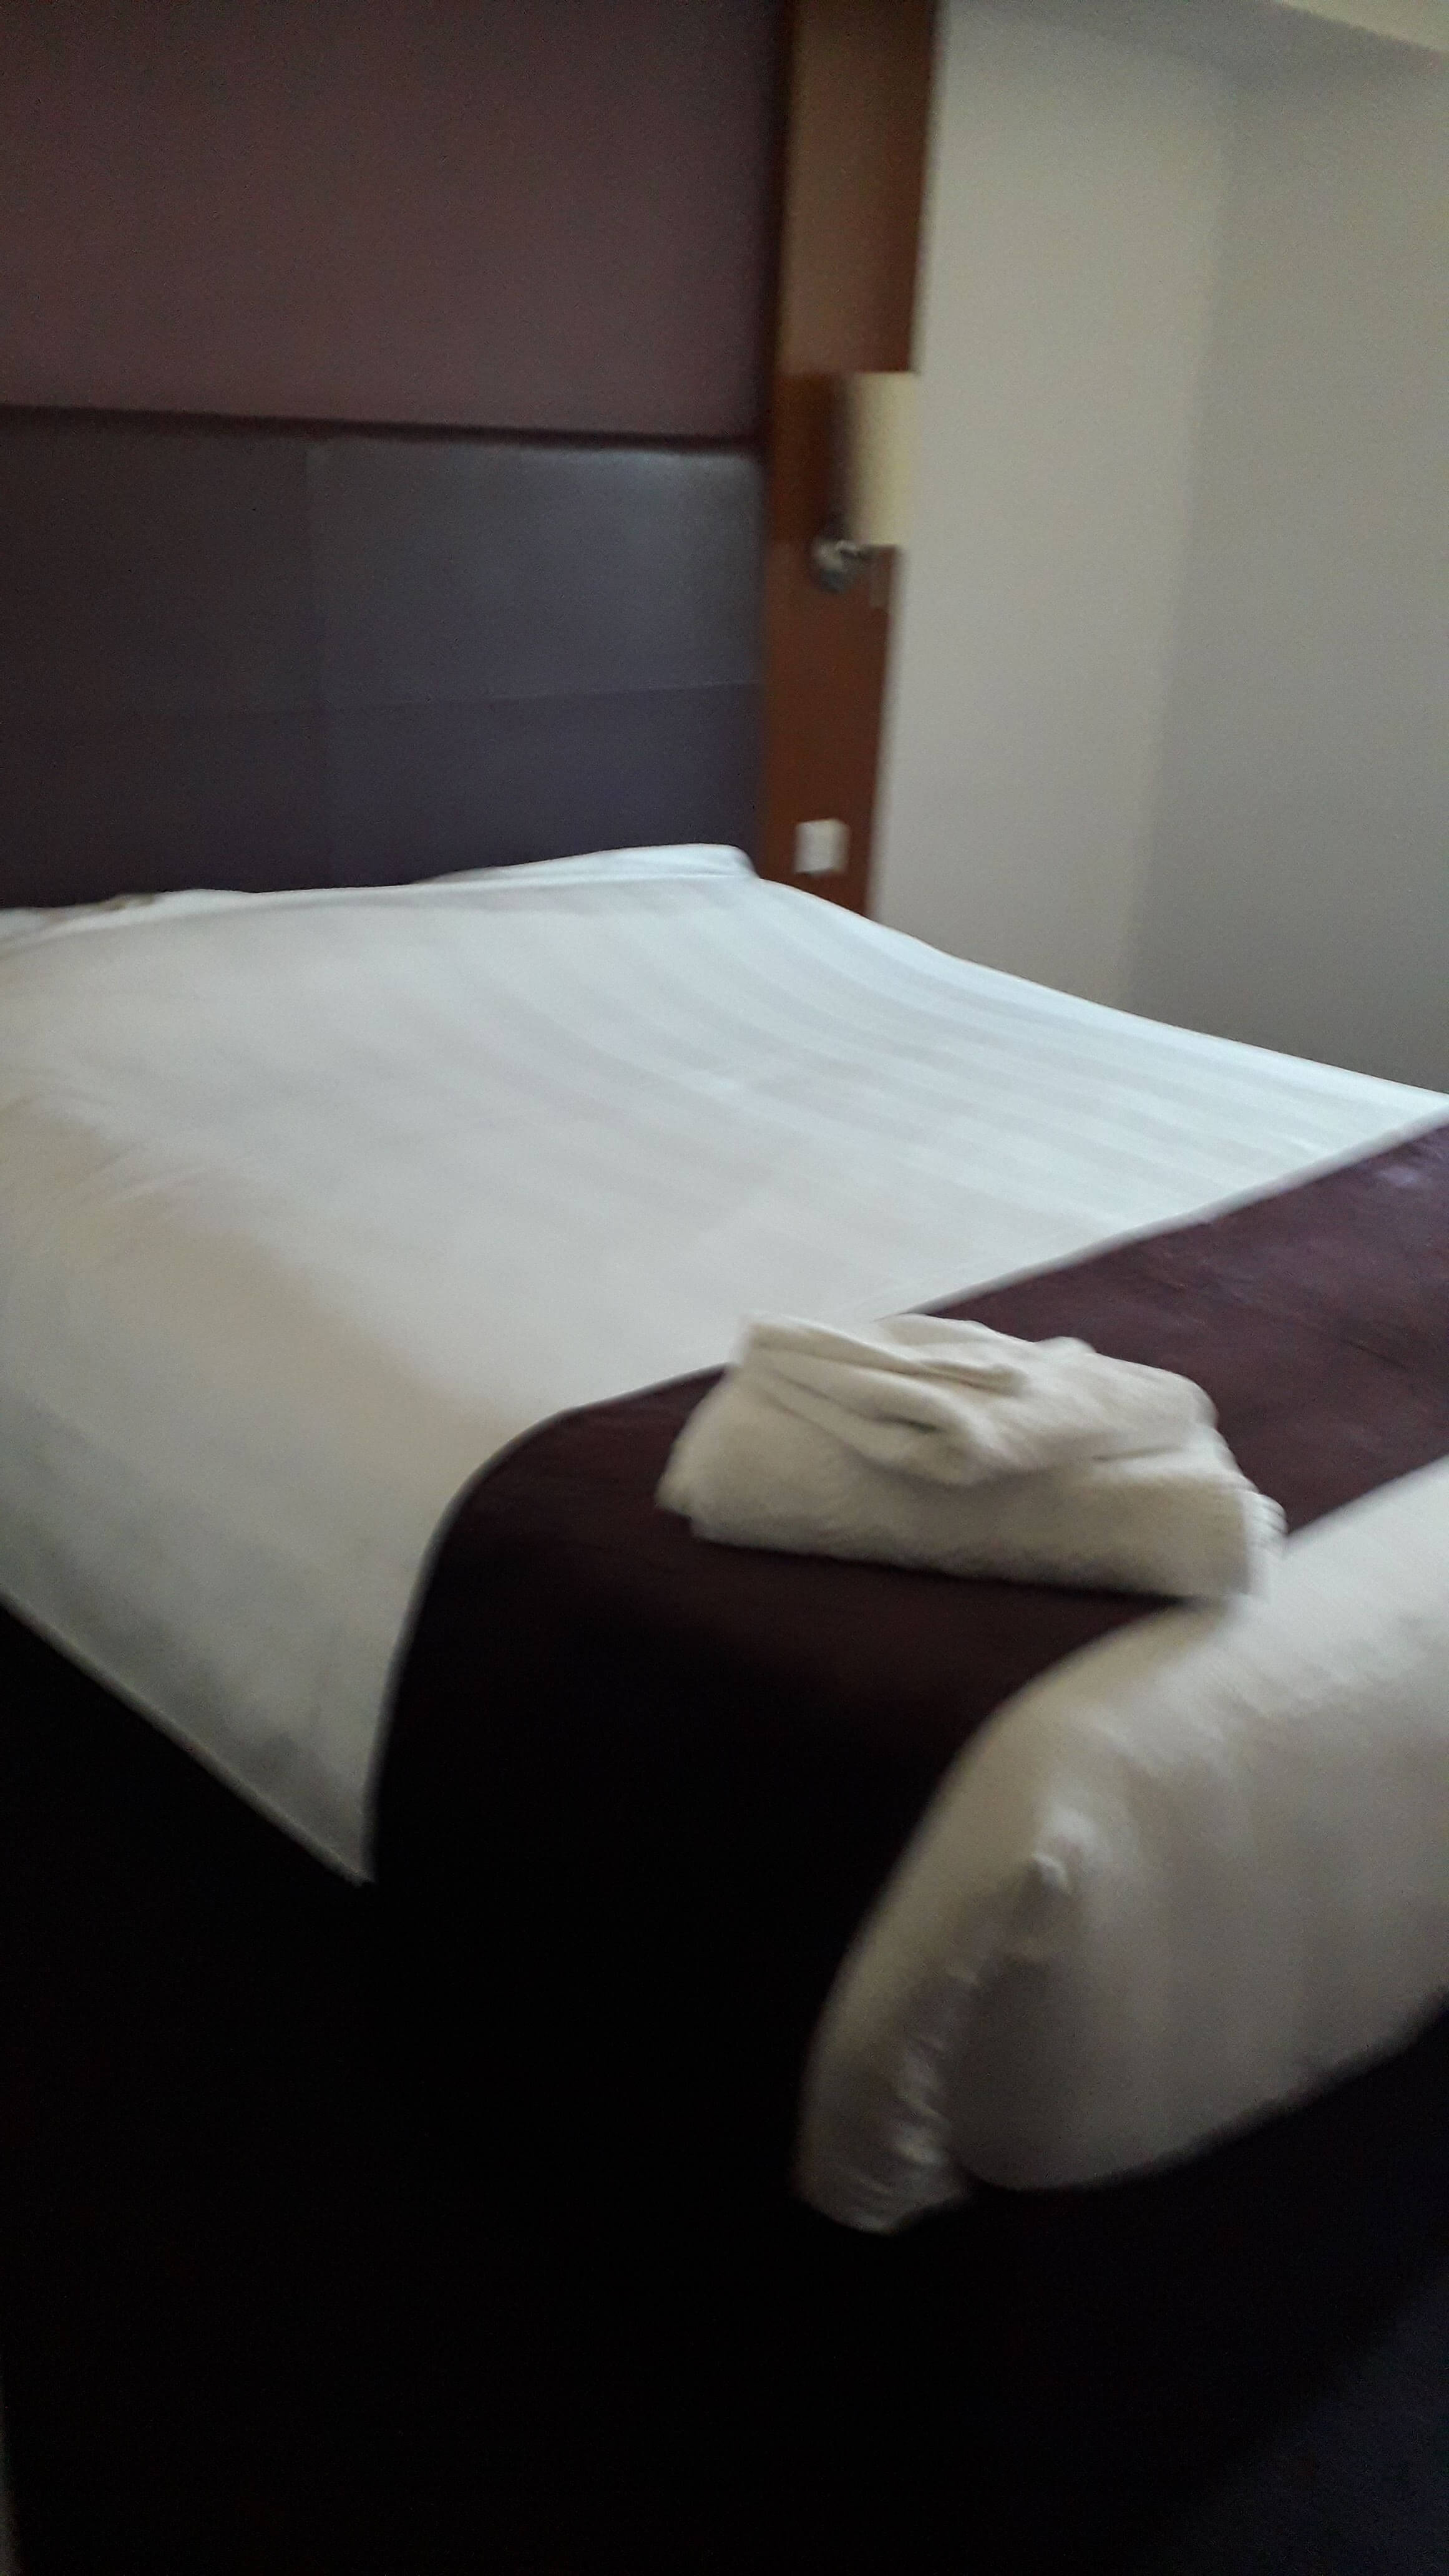 My favourite affordable hotel brand is Premier Inn. You come to know and expect a certain standard of quality. Check out my review of Premier Inn Manchester Old Trafford. I even gave it a rating out of five too. 